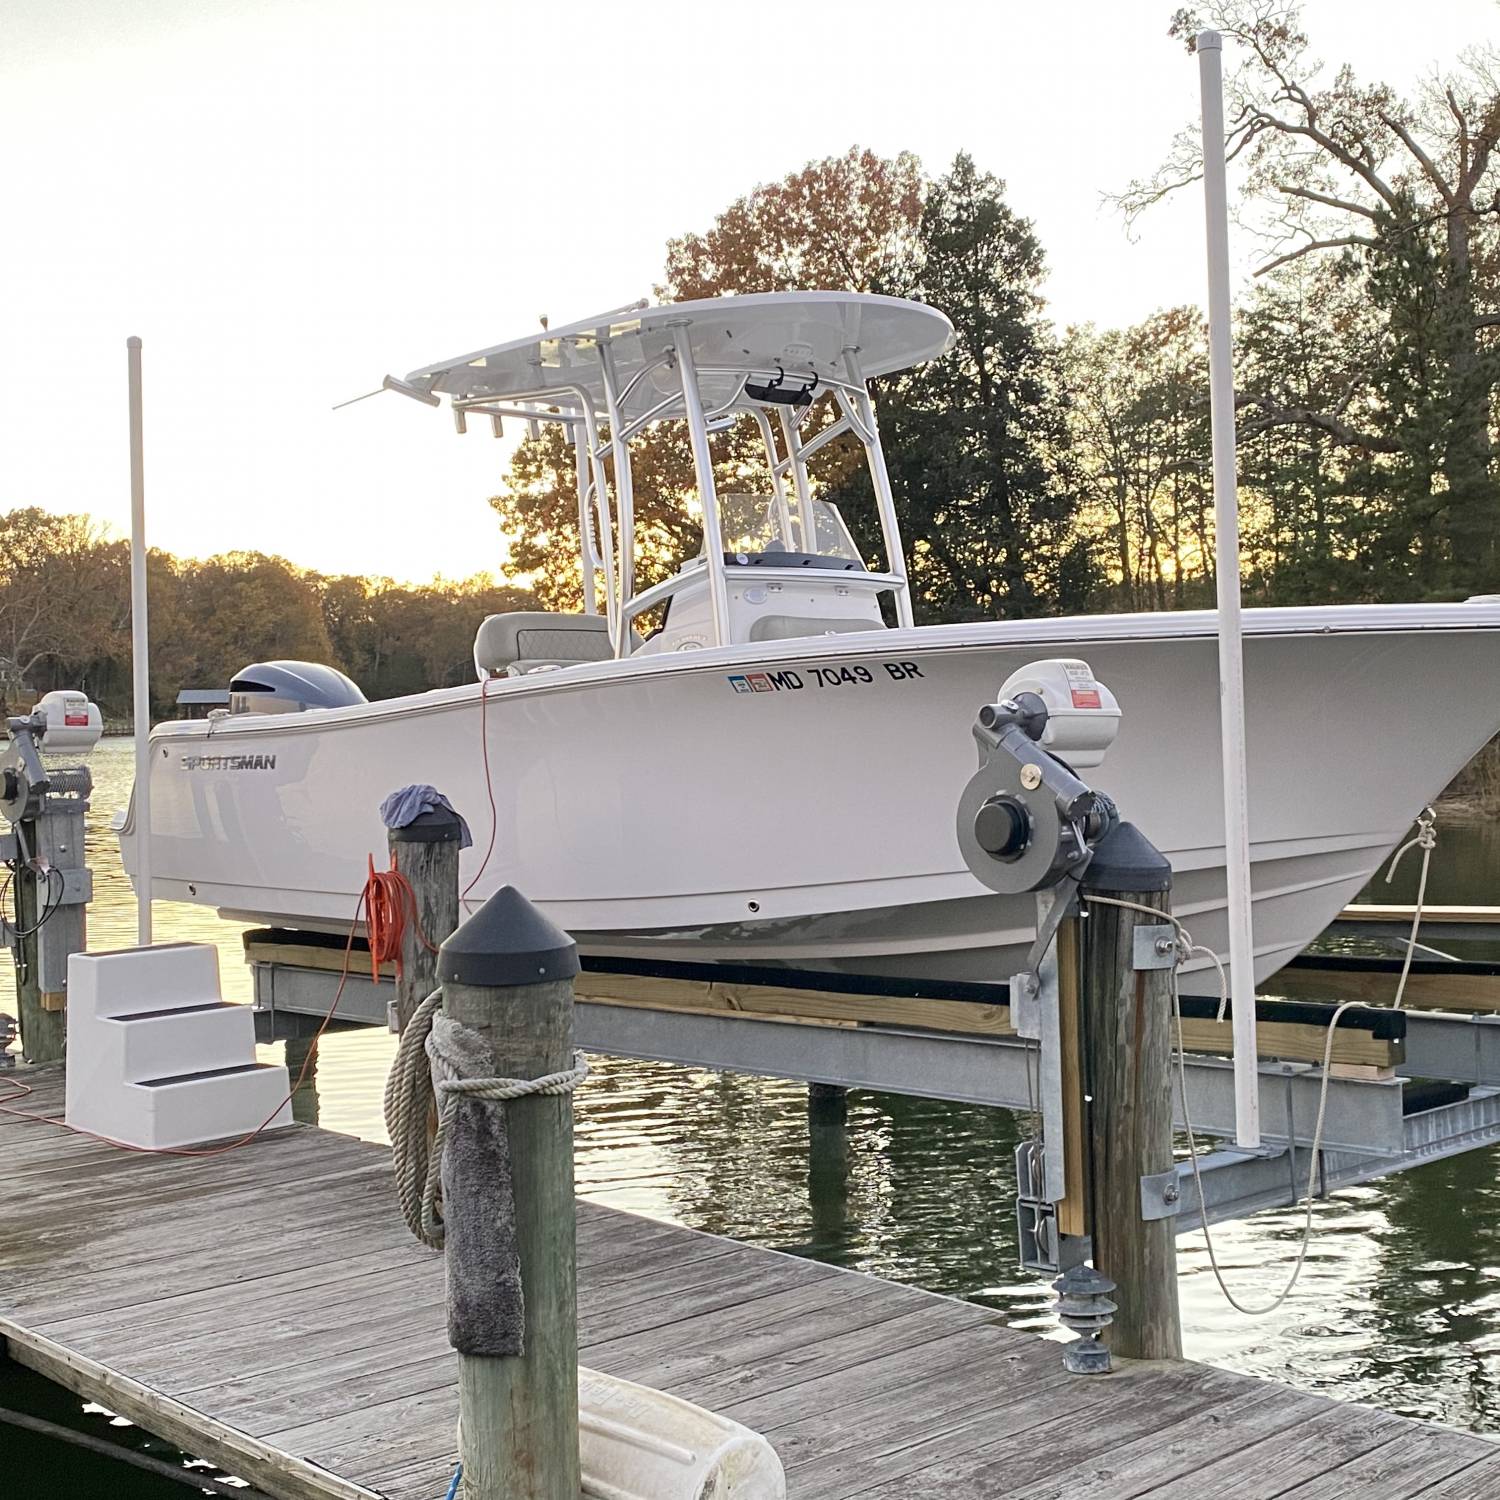 Title: Chillin - On board their Sportsman Heritage 231 Center Console - Location: Solomon Island Md. Participating in the Photo Contest #SportsmanDecember